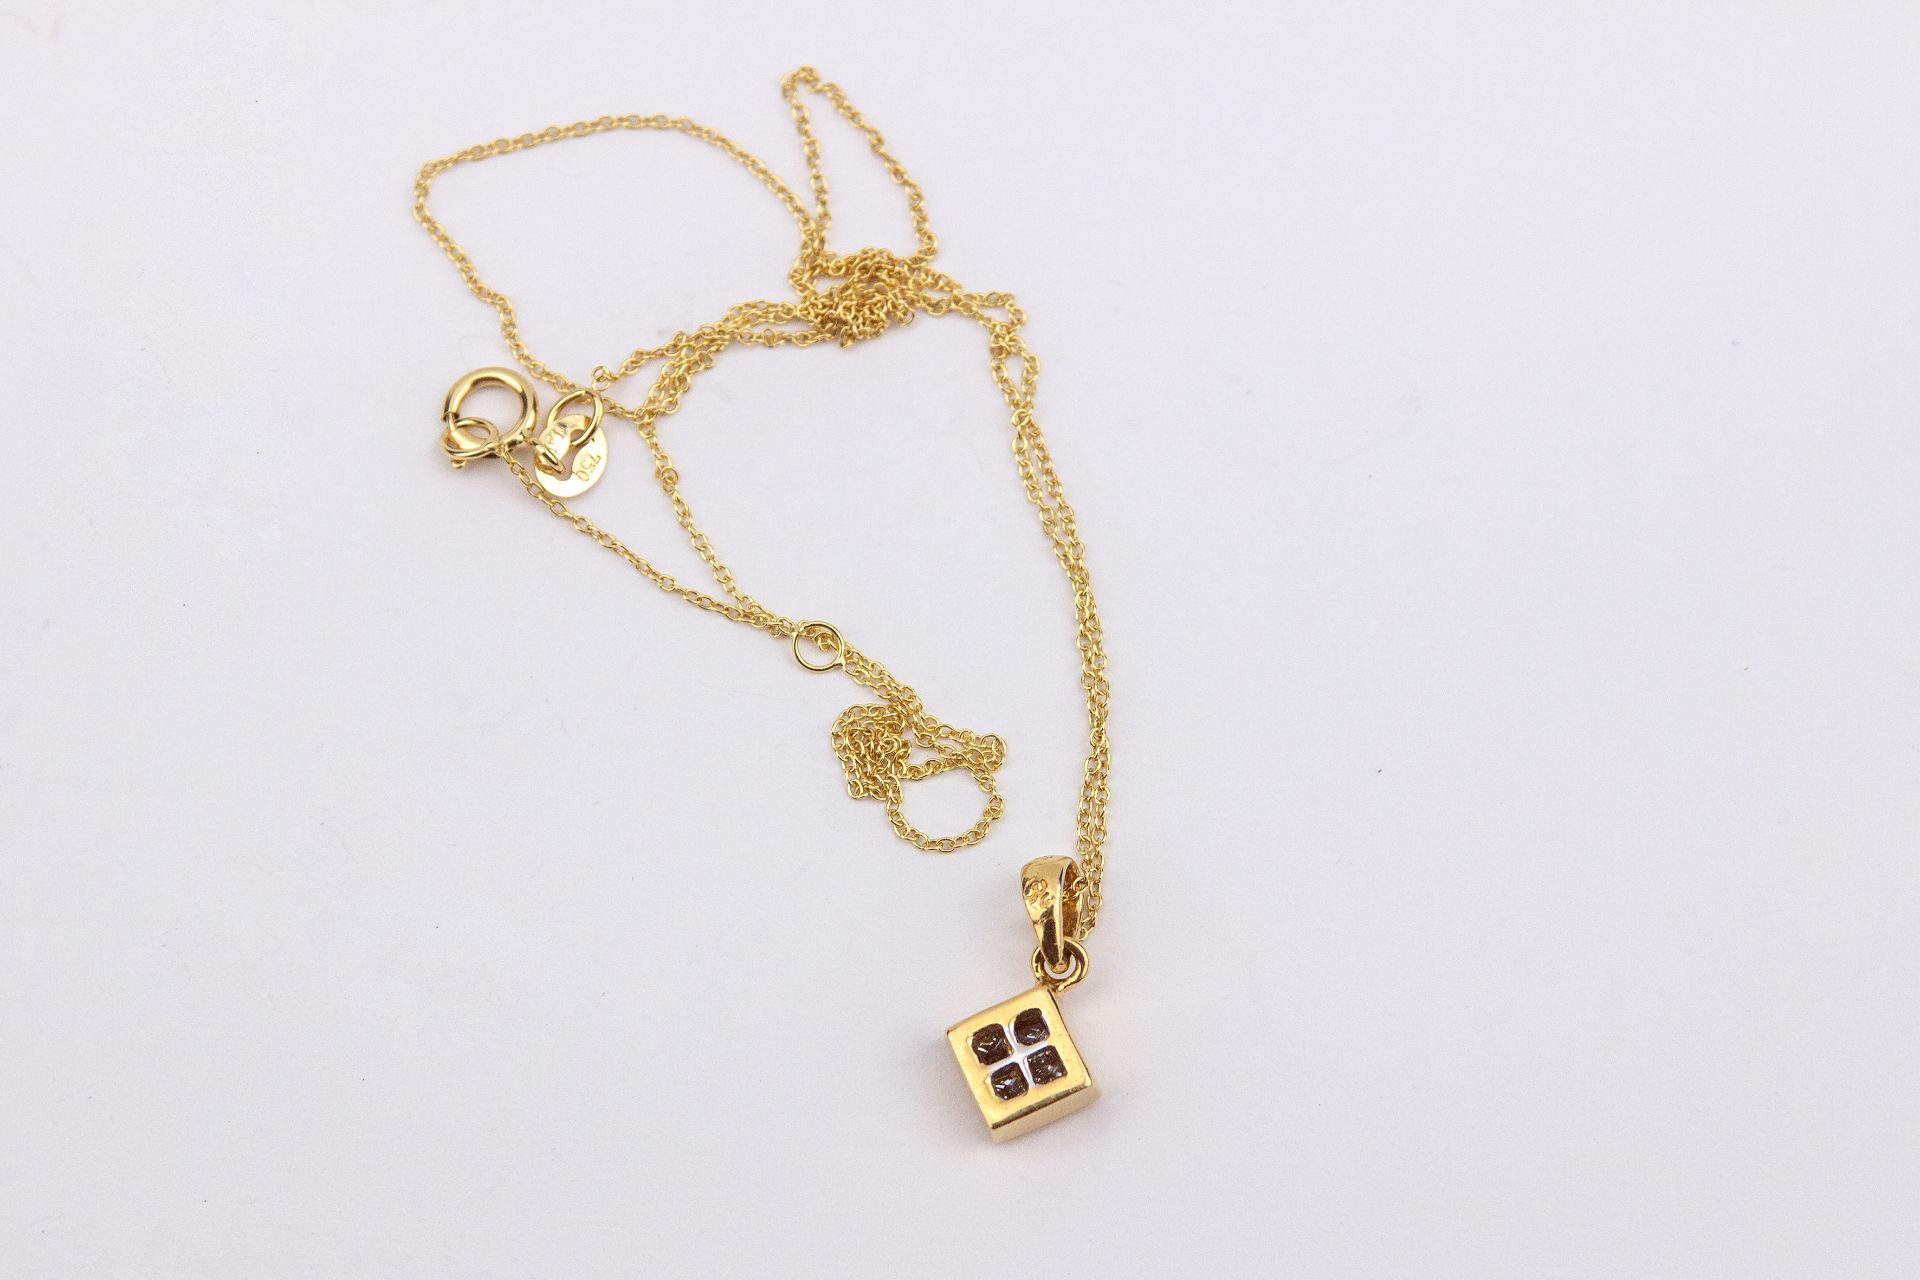 A princess cut diamonds nd 18k. yellow gold cluster pendant and chain - Image 2 of 2